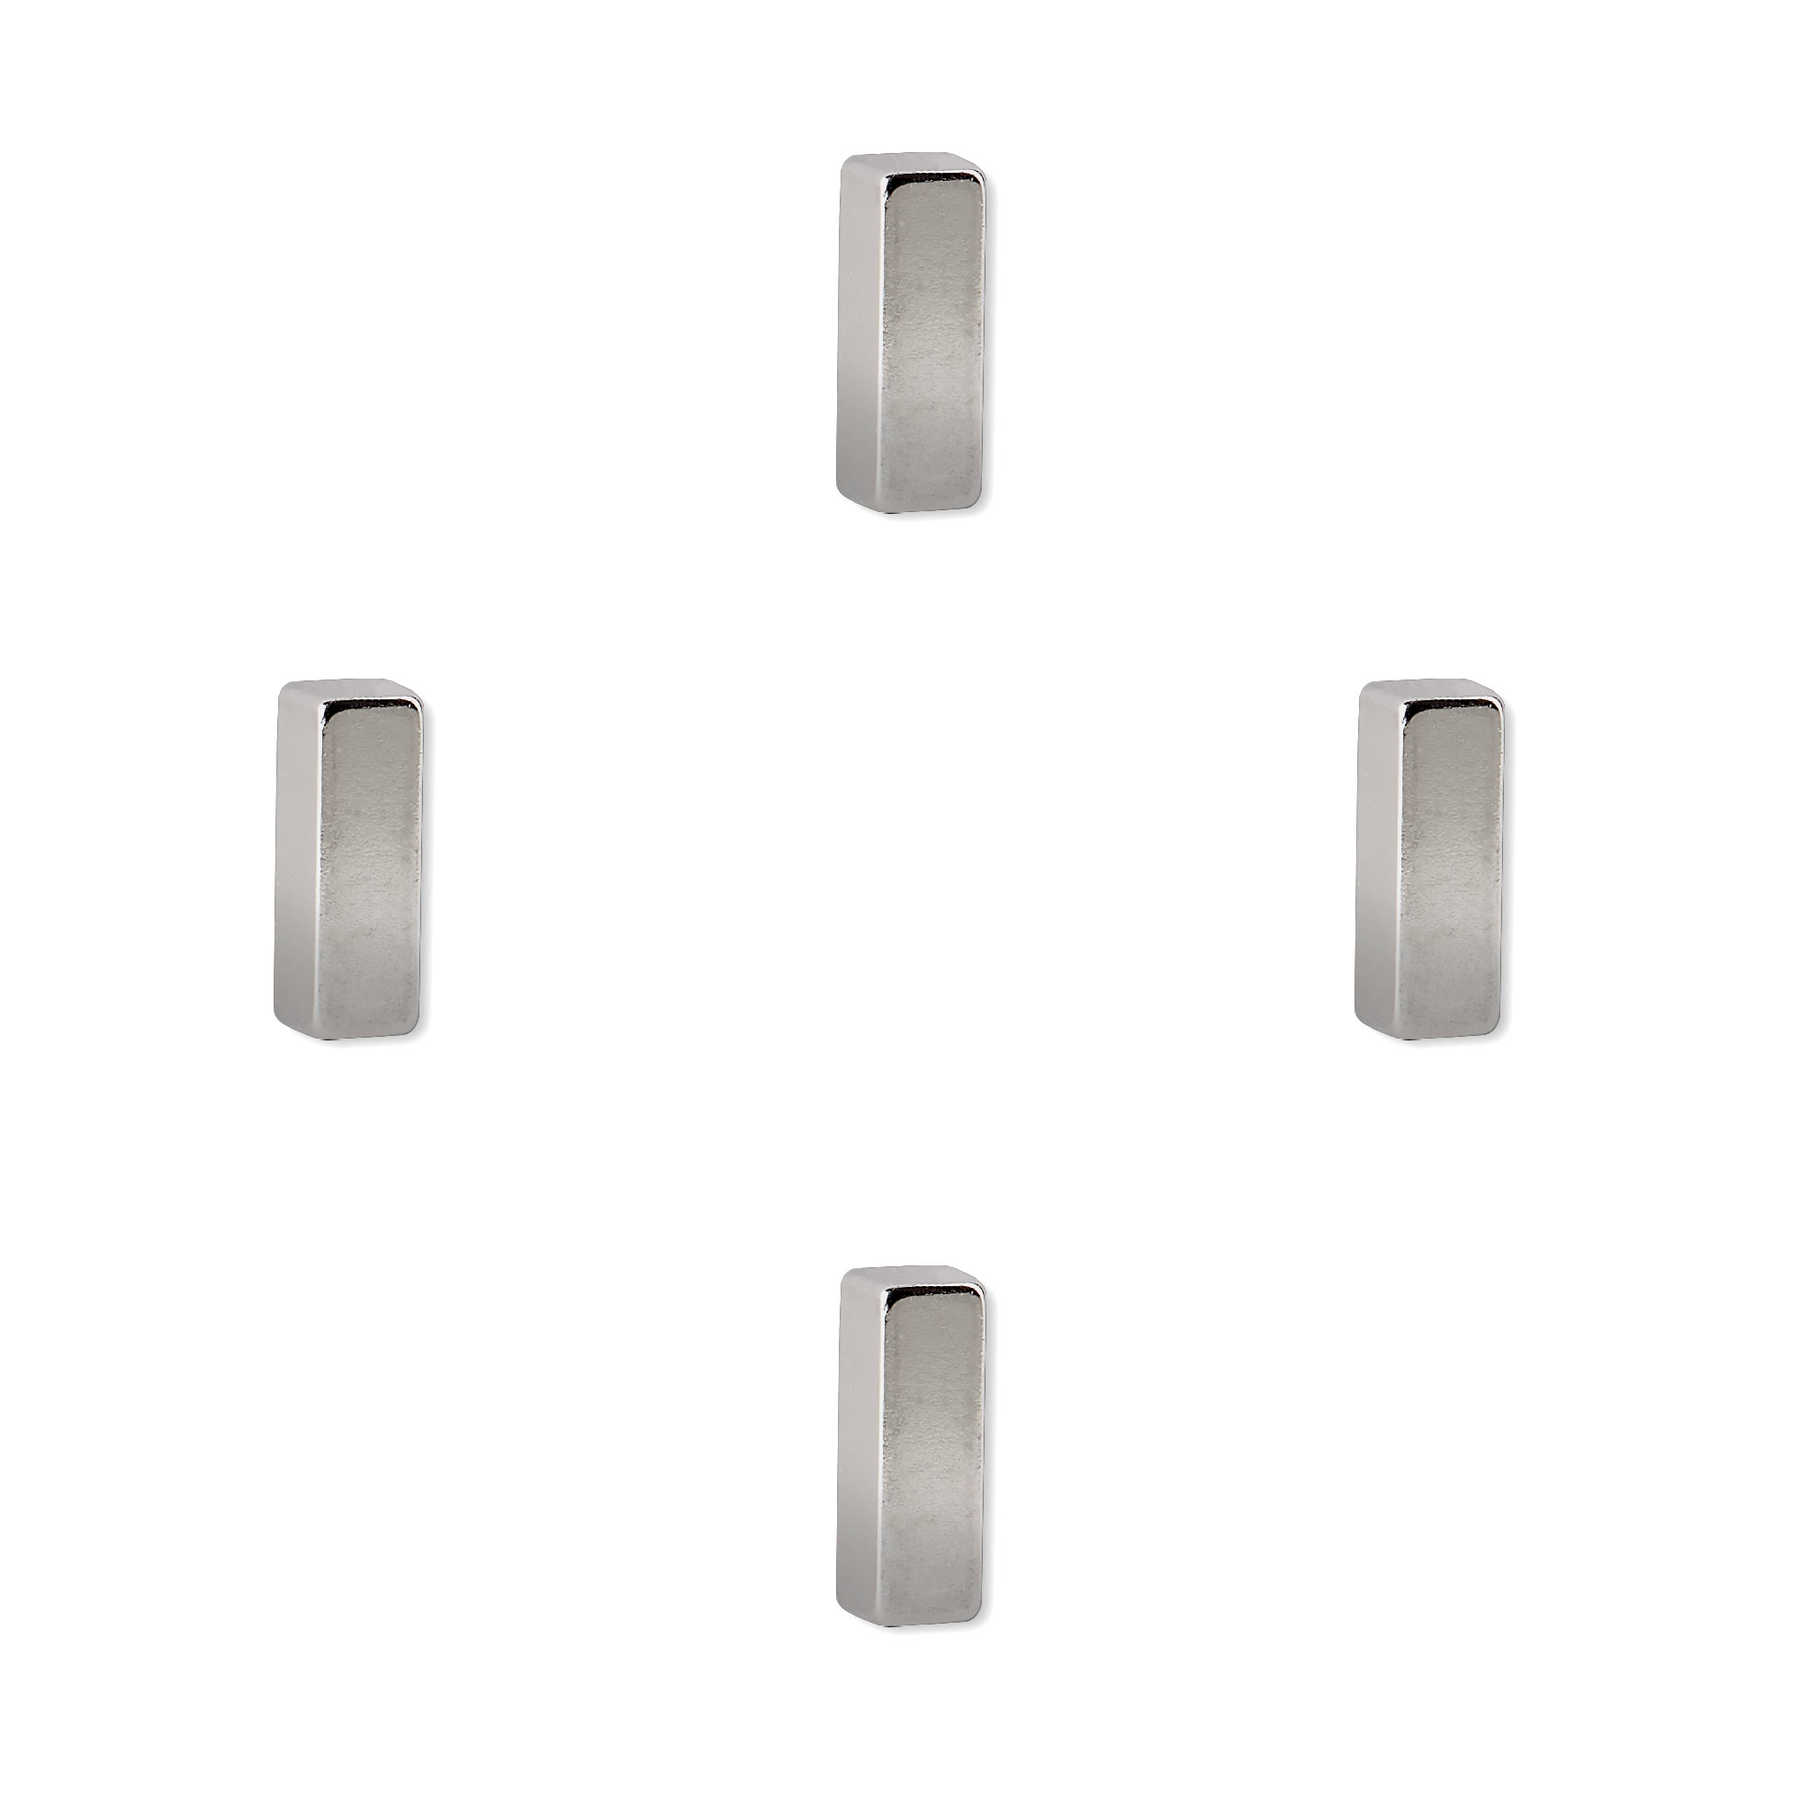 Set of 4 magnets in 6 x 18 x 6 mm
